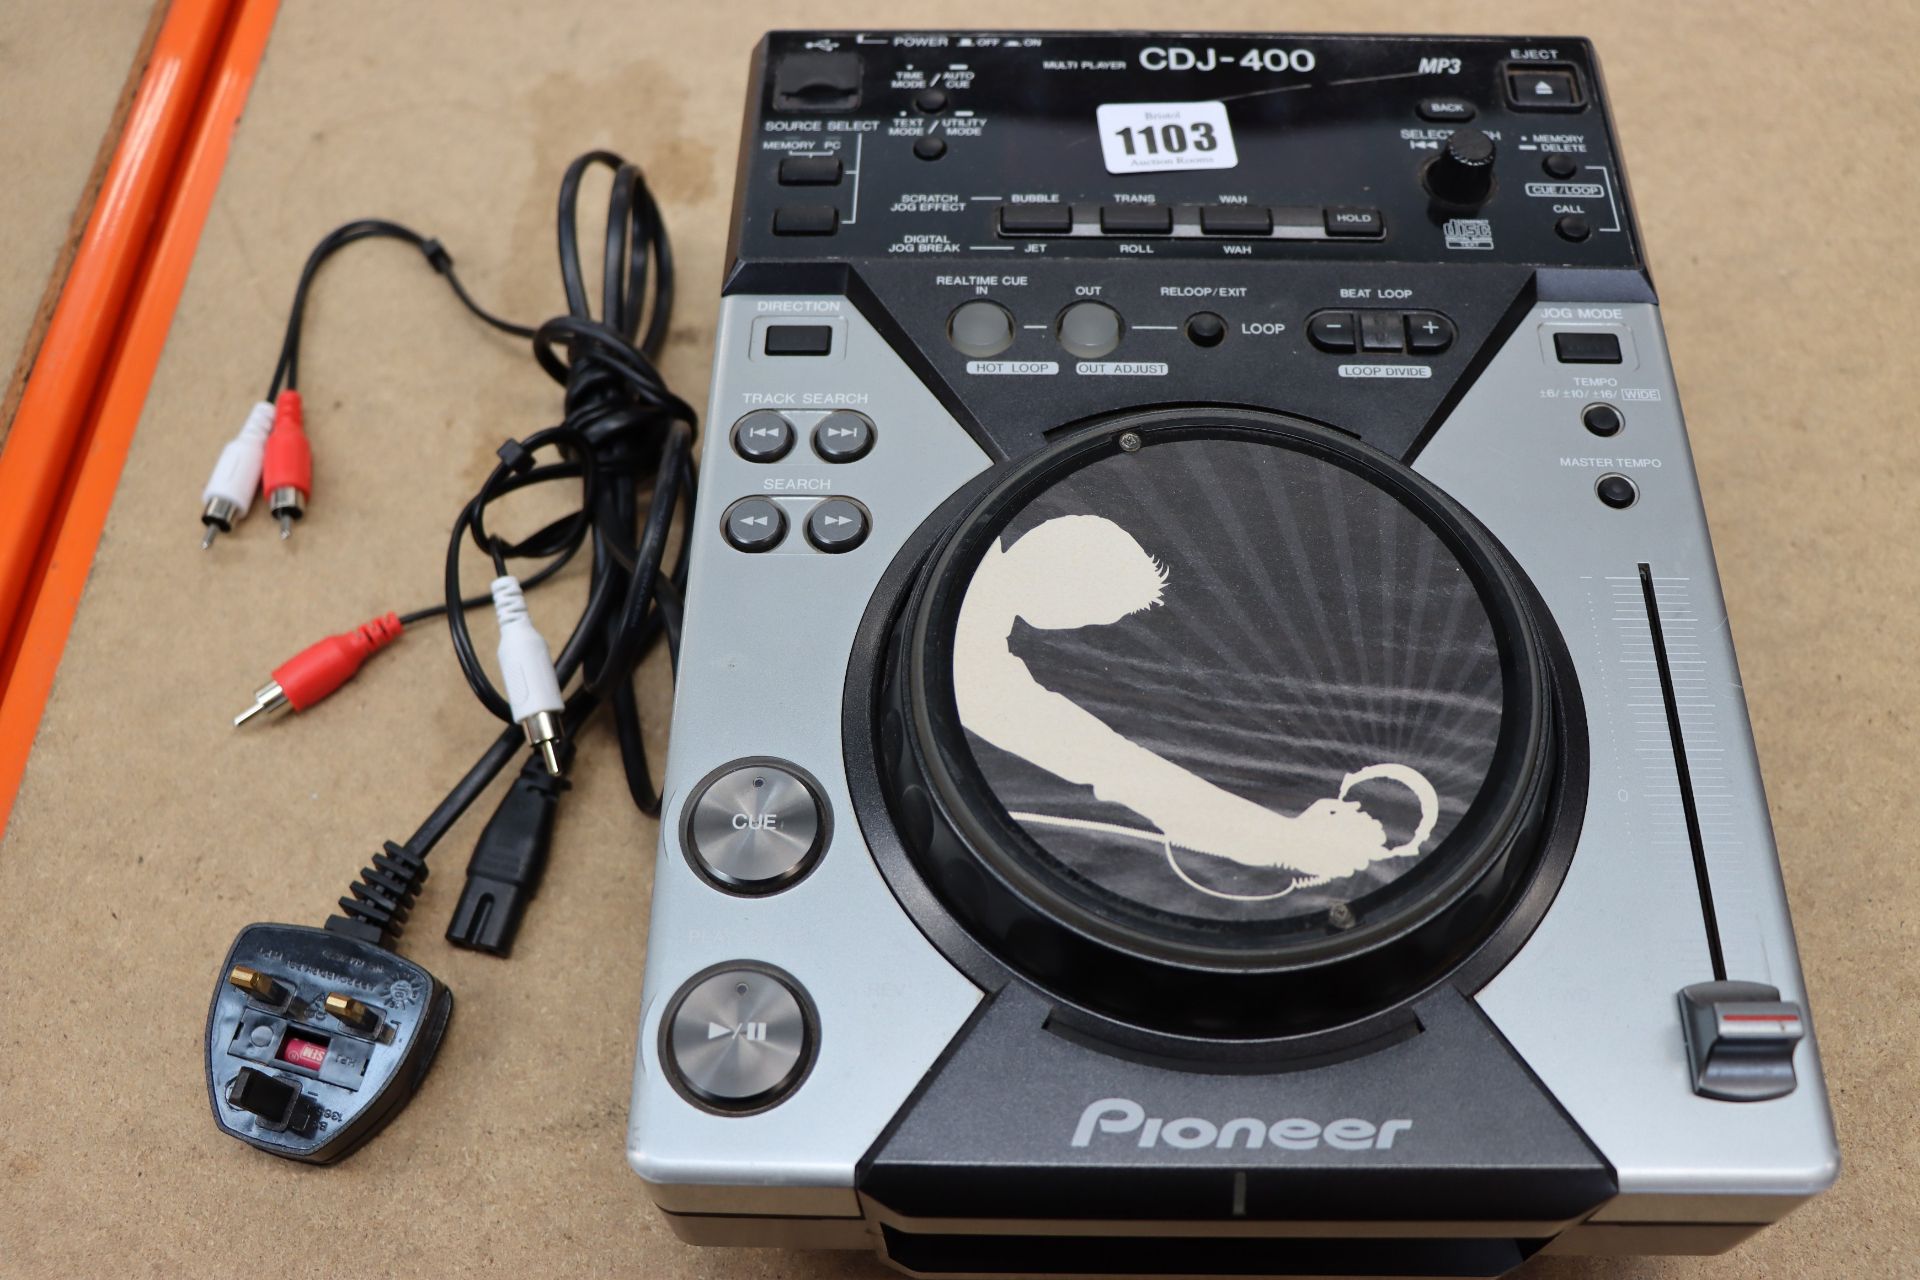 One pre-owned Pioneer compact disc player (CDJ-400).